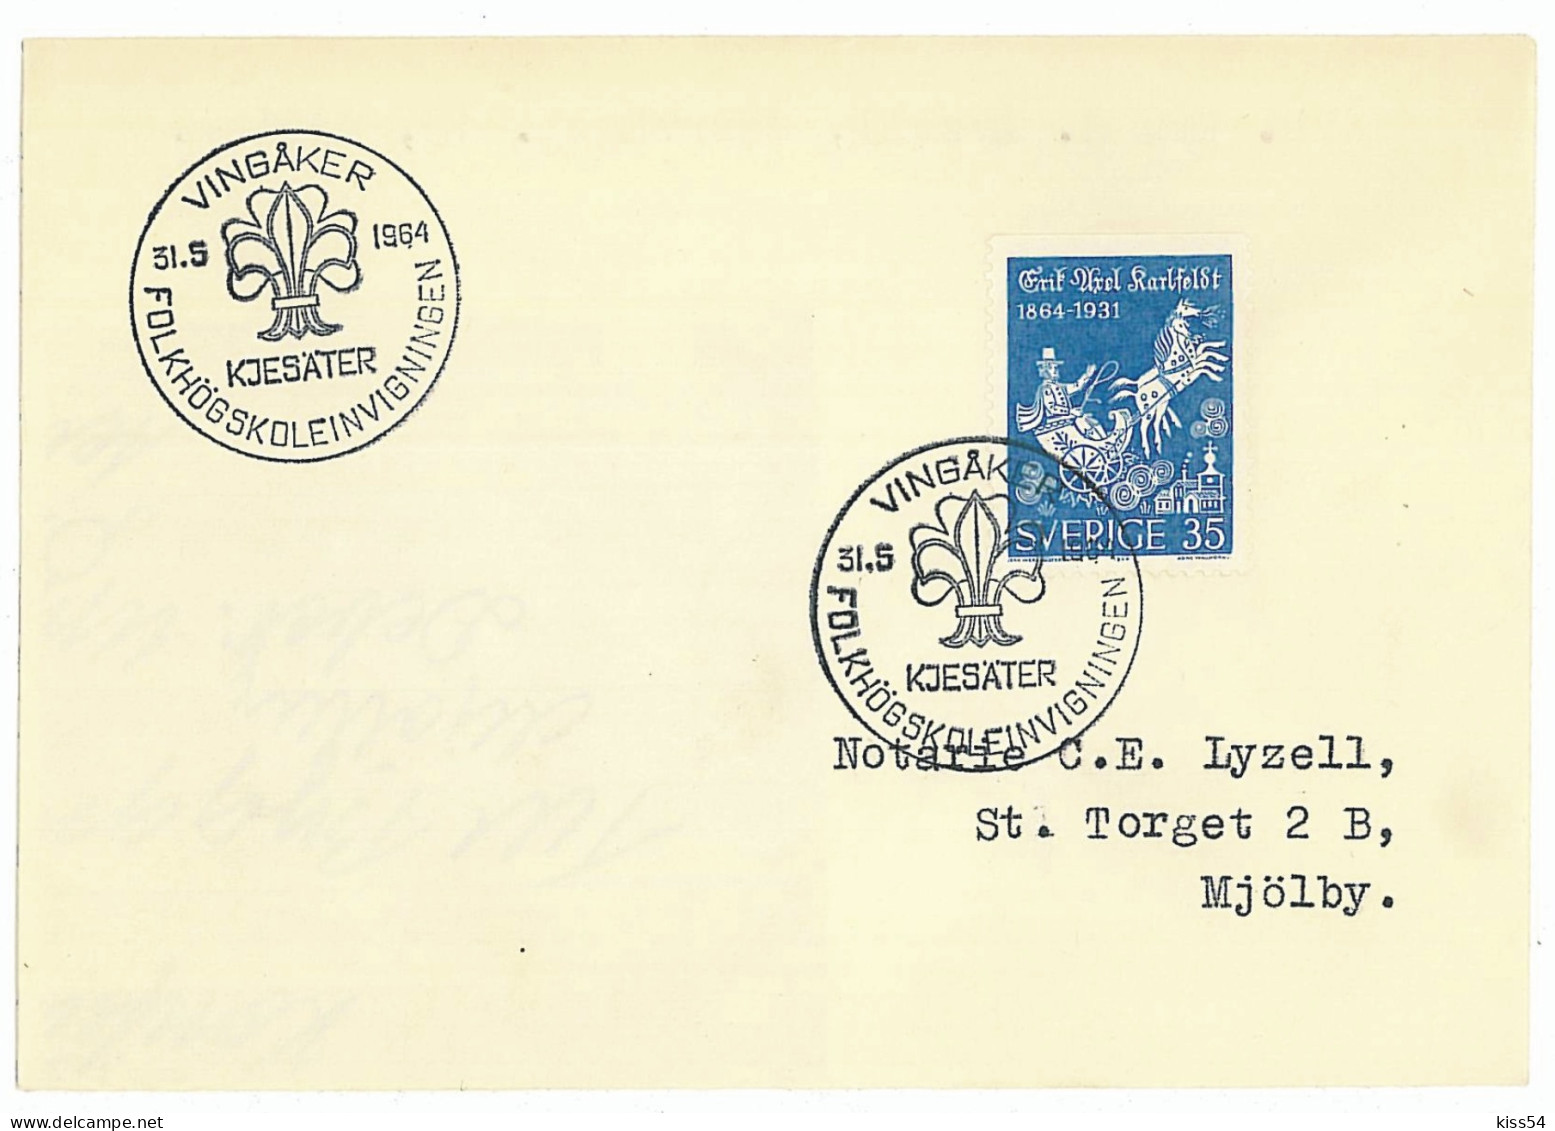 SC 66 - 692 Scout SWEDEN - Cover - Used - 1964 - Covers & Documents